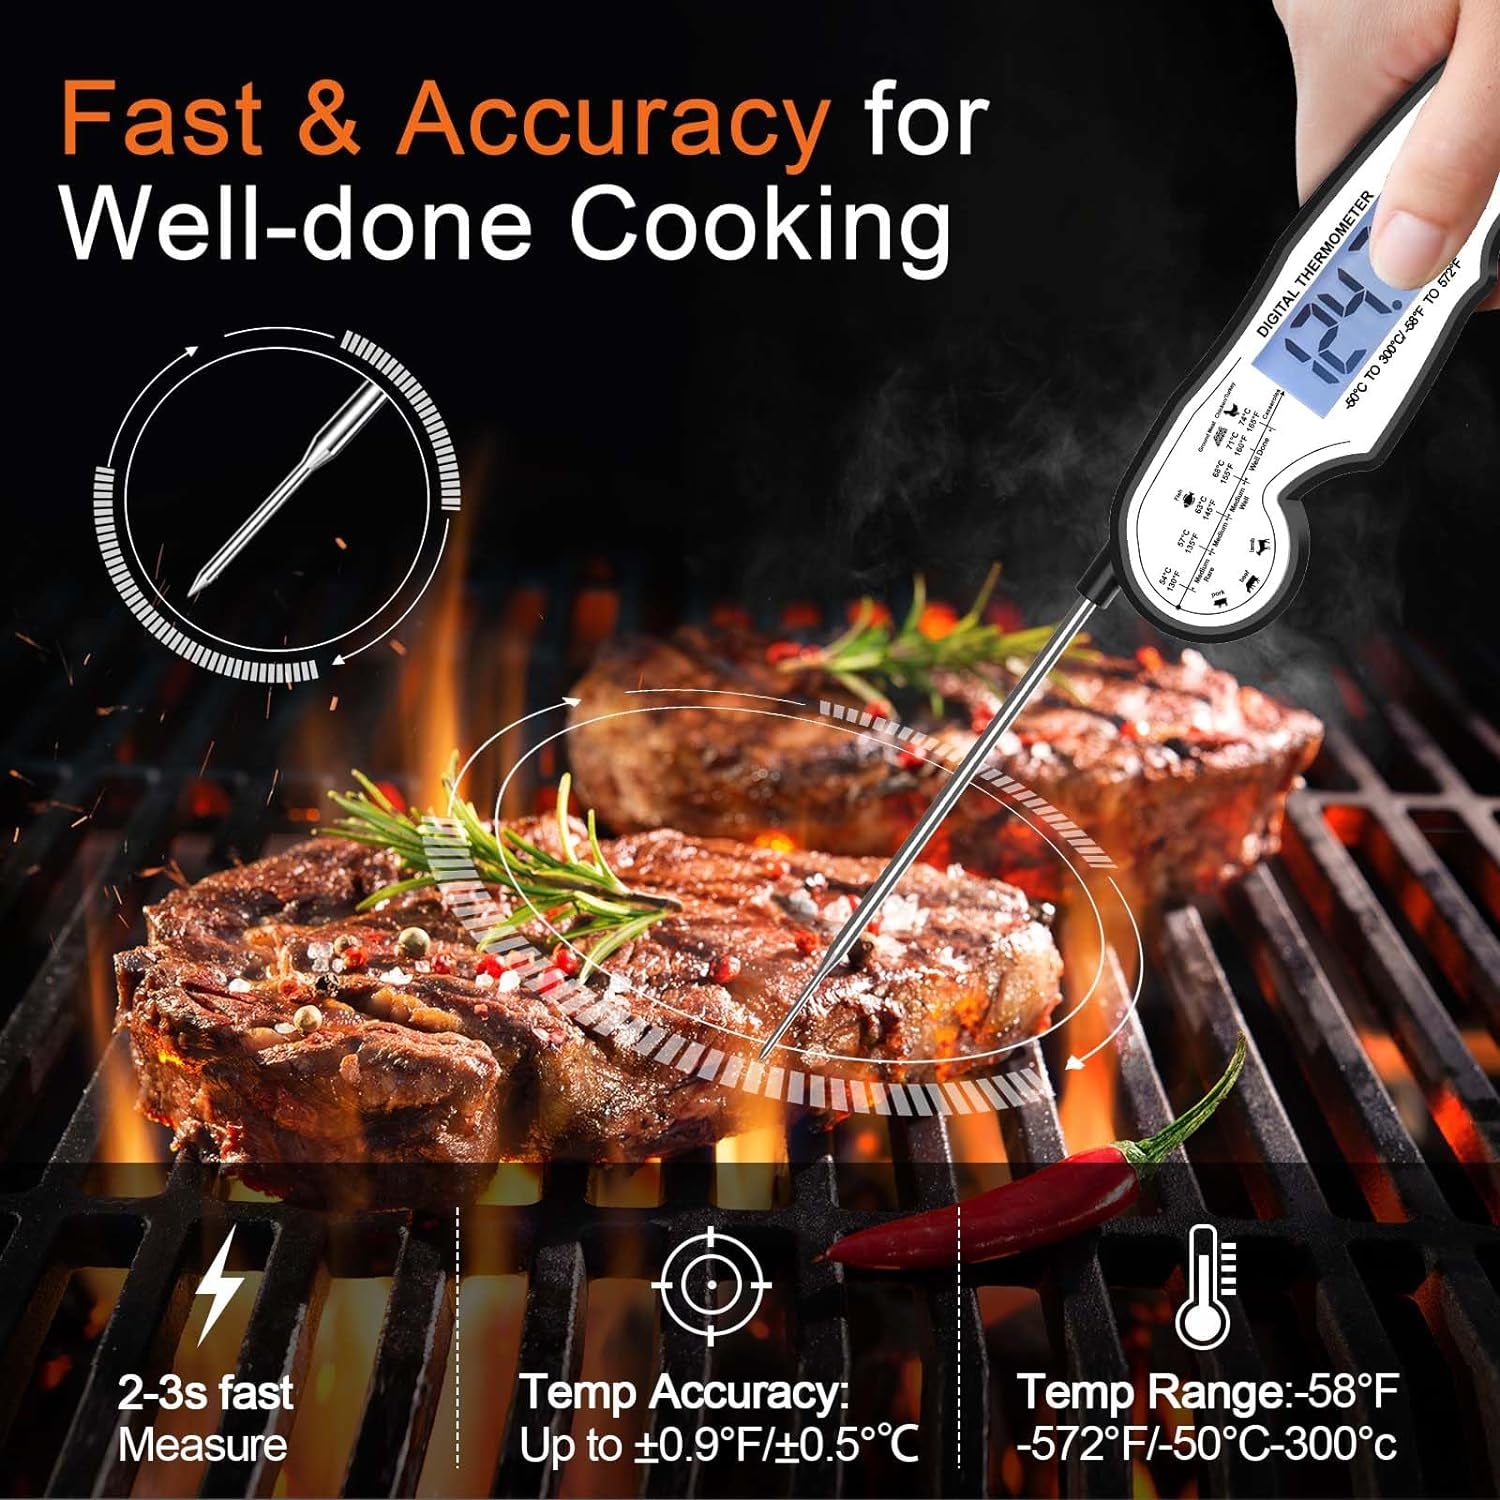 Digital Instant Read Meat Thermometer Digital for Grilling and Cooking - ANDAXIN Waterproof Ultra-Fast Thermometer with Backlight&Calibration&Foldable Probe for Kitchen,Deep Fry,Bbq,Grill-Black/White